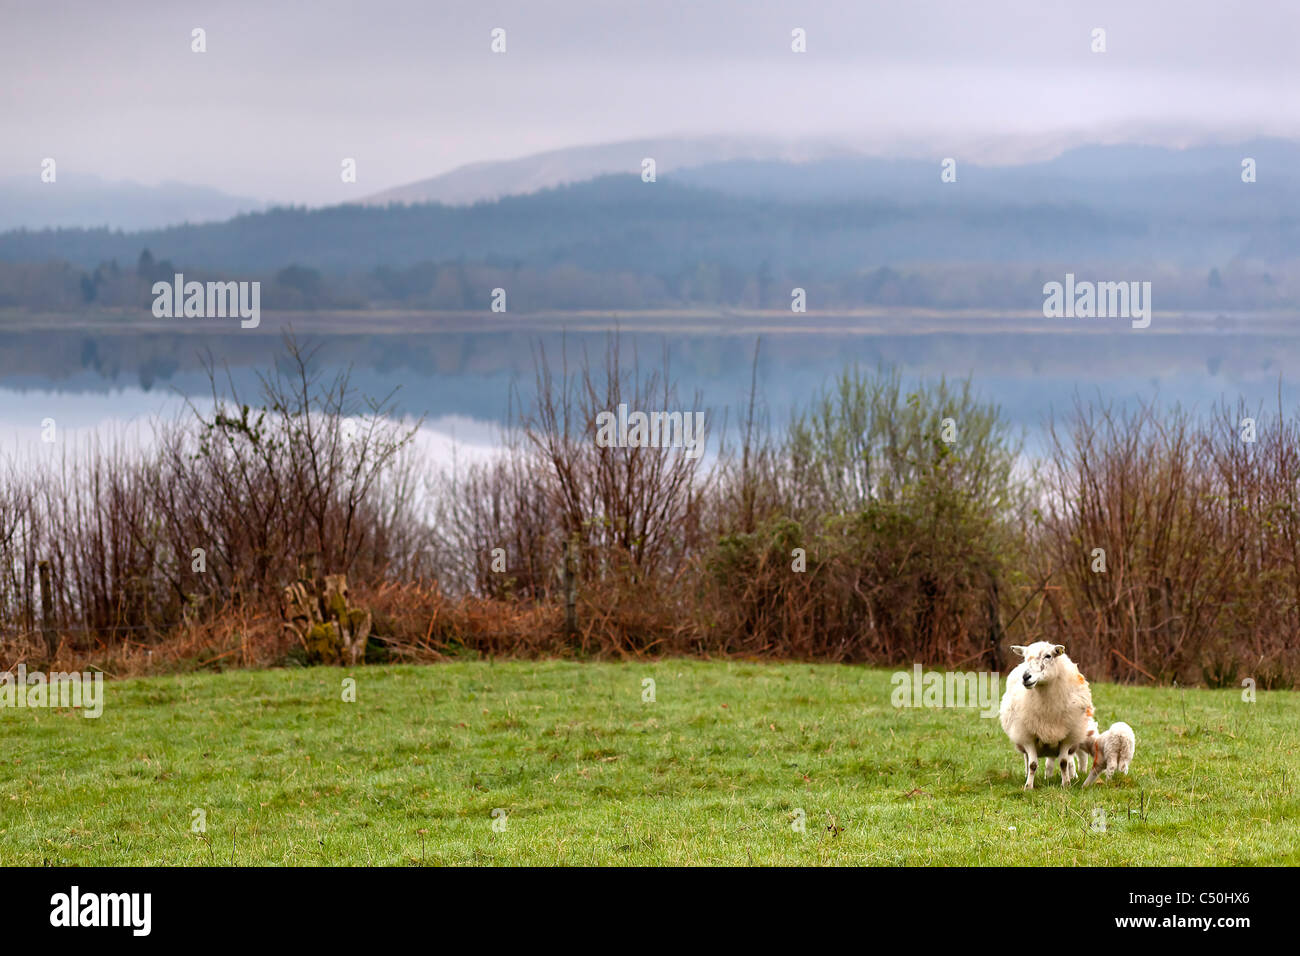 Sheep with her child in Scotland Stock Photo